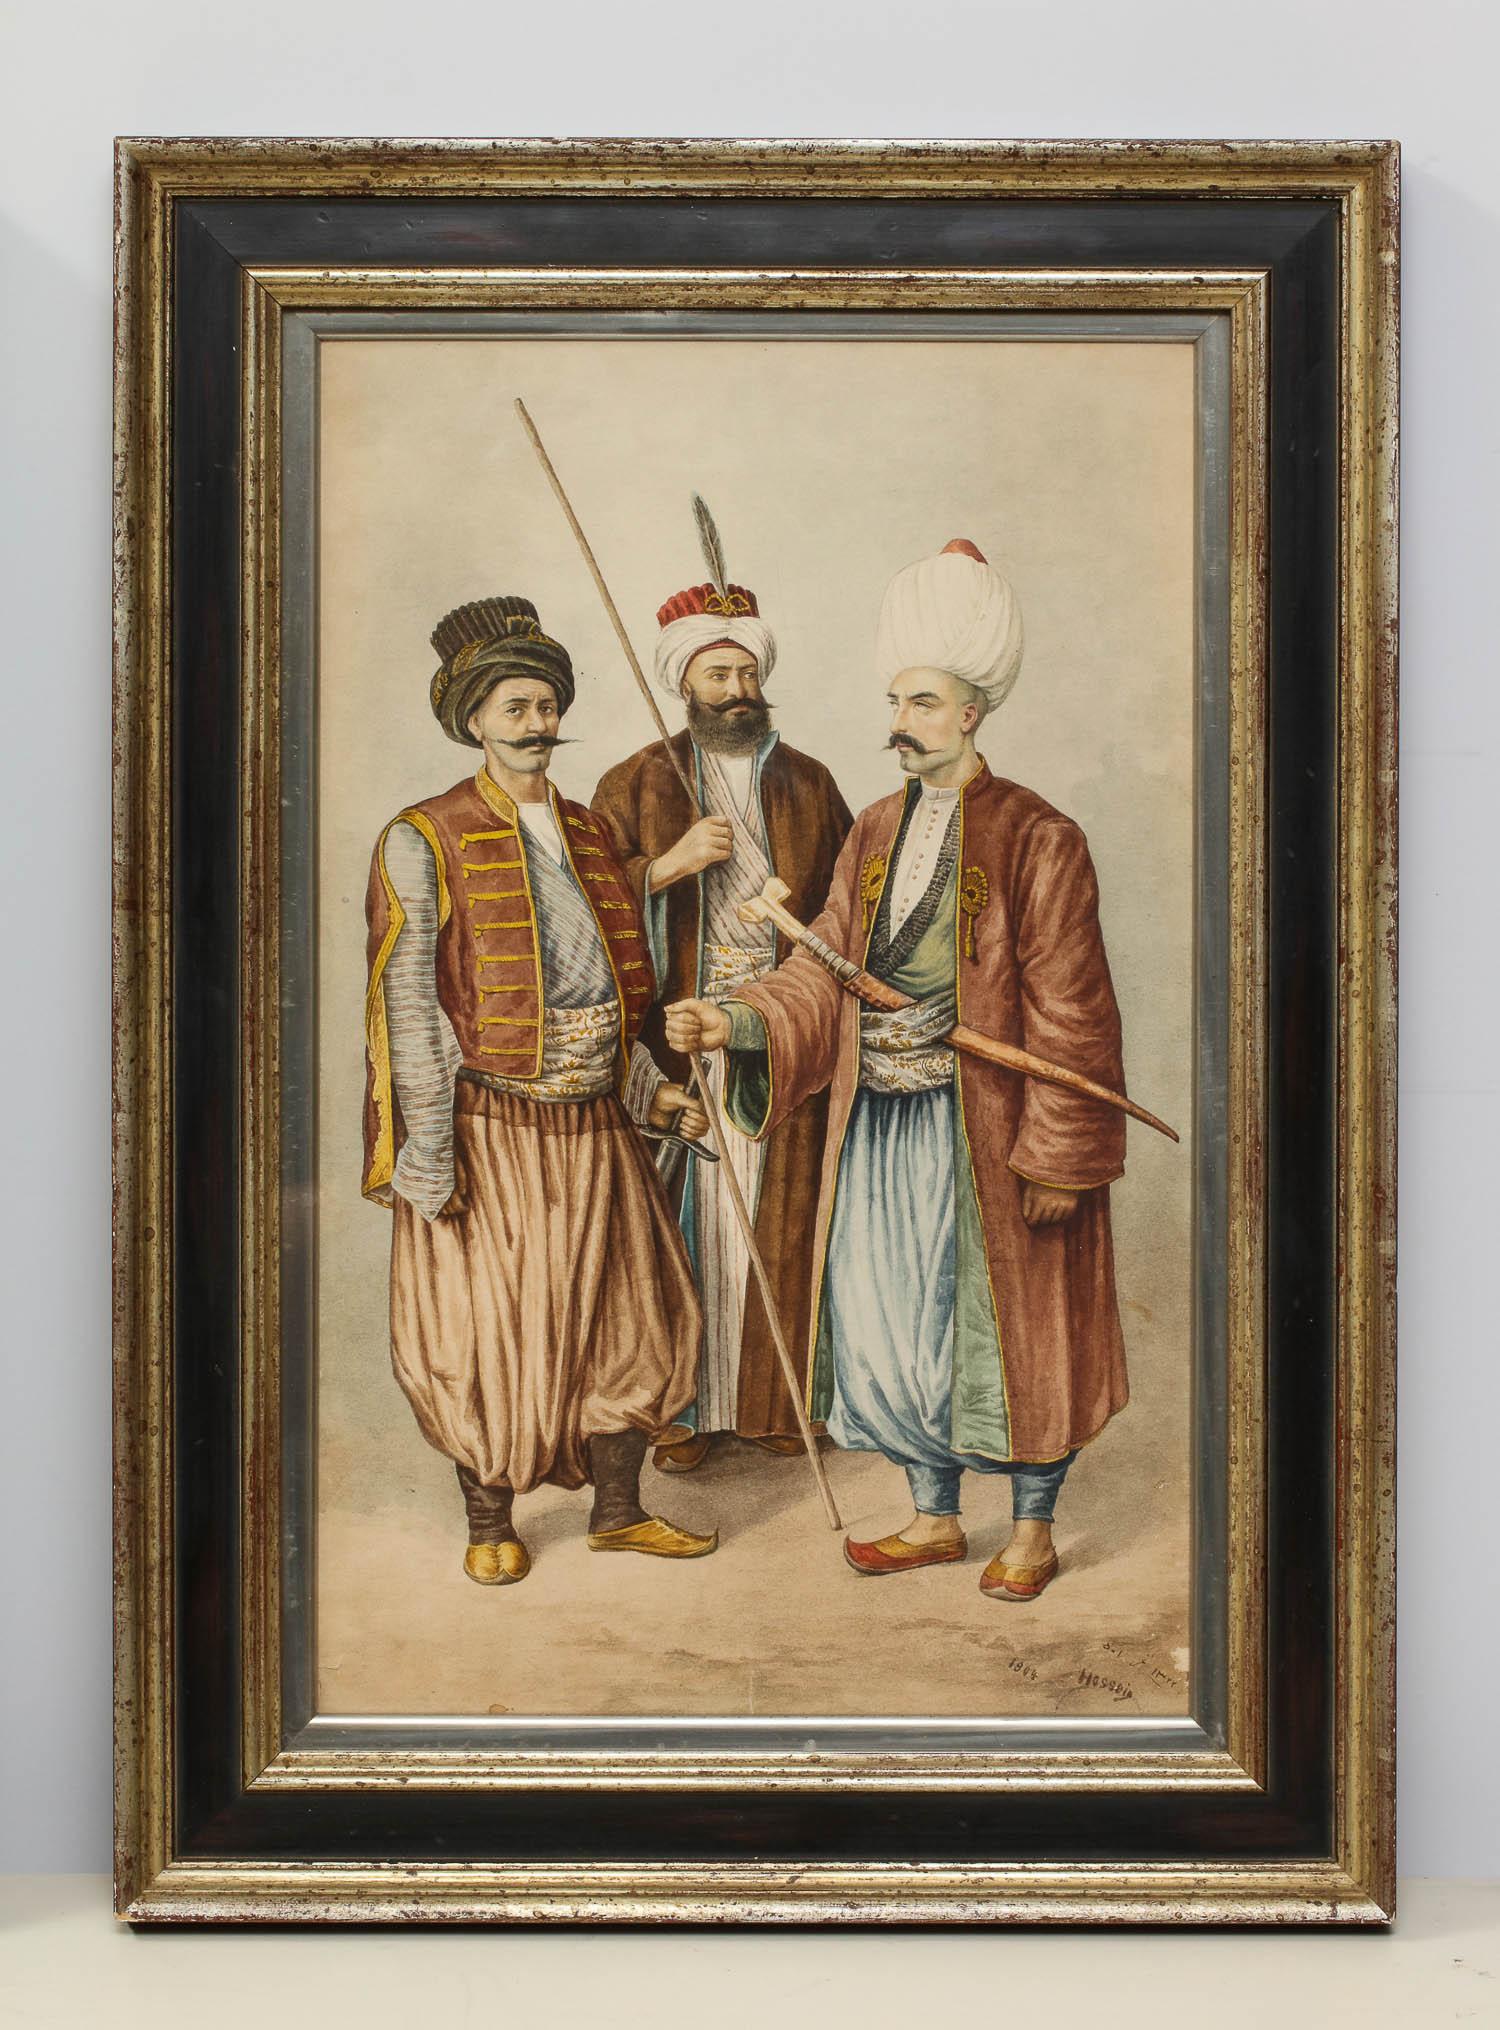 Islamic Magnificent Pair of Turkish Ottoman Watercolors of Sultans by Hossein